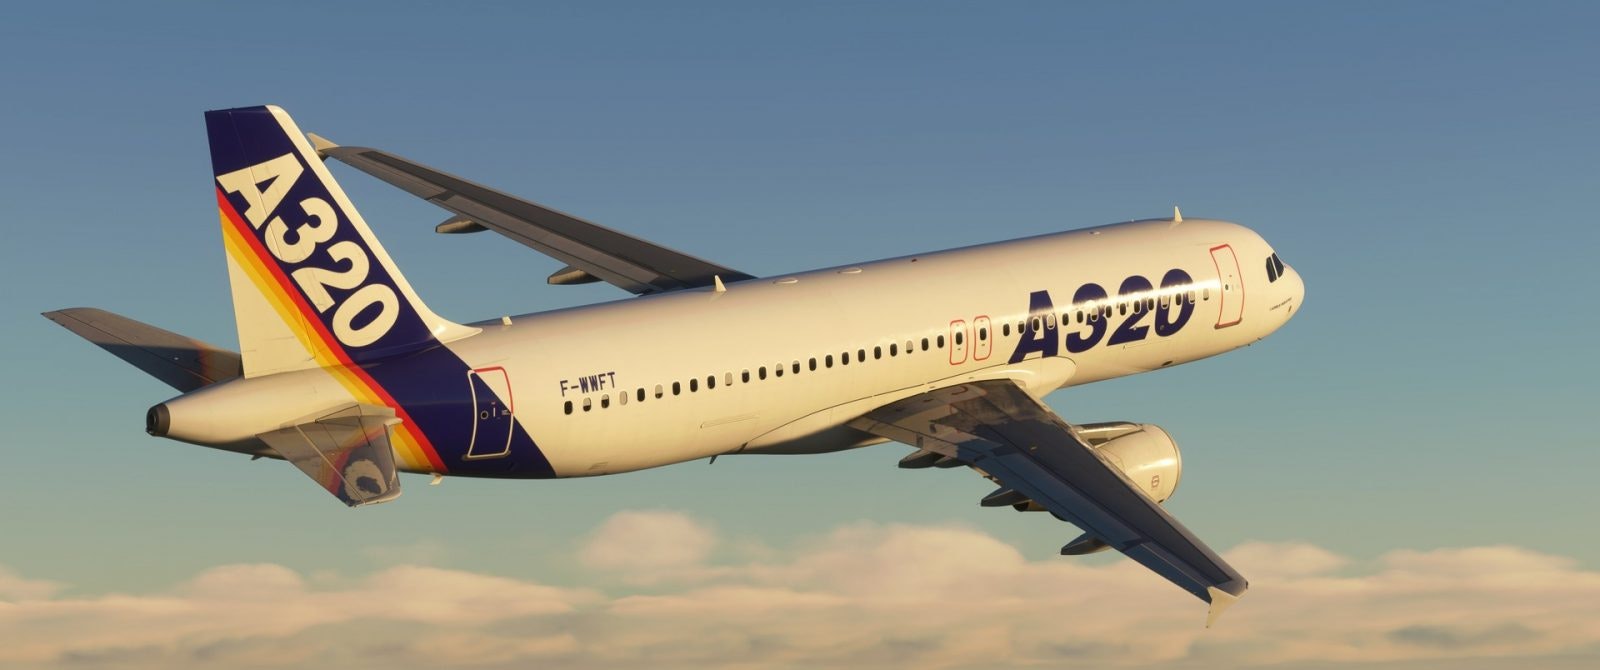 Fenix A320 Development Update: Performance, CDPLC and New Livery Previews